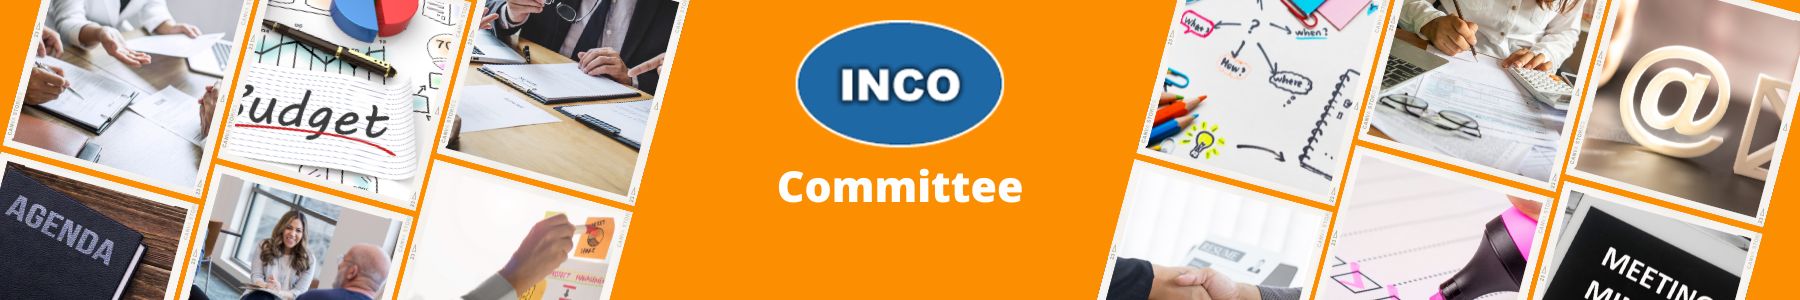 INCO Committee